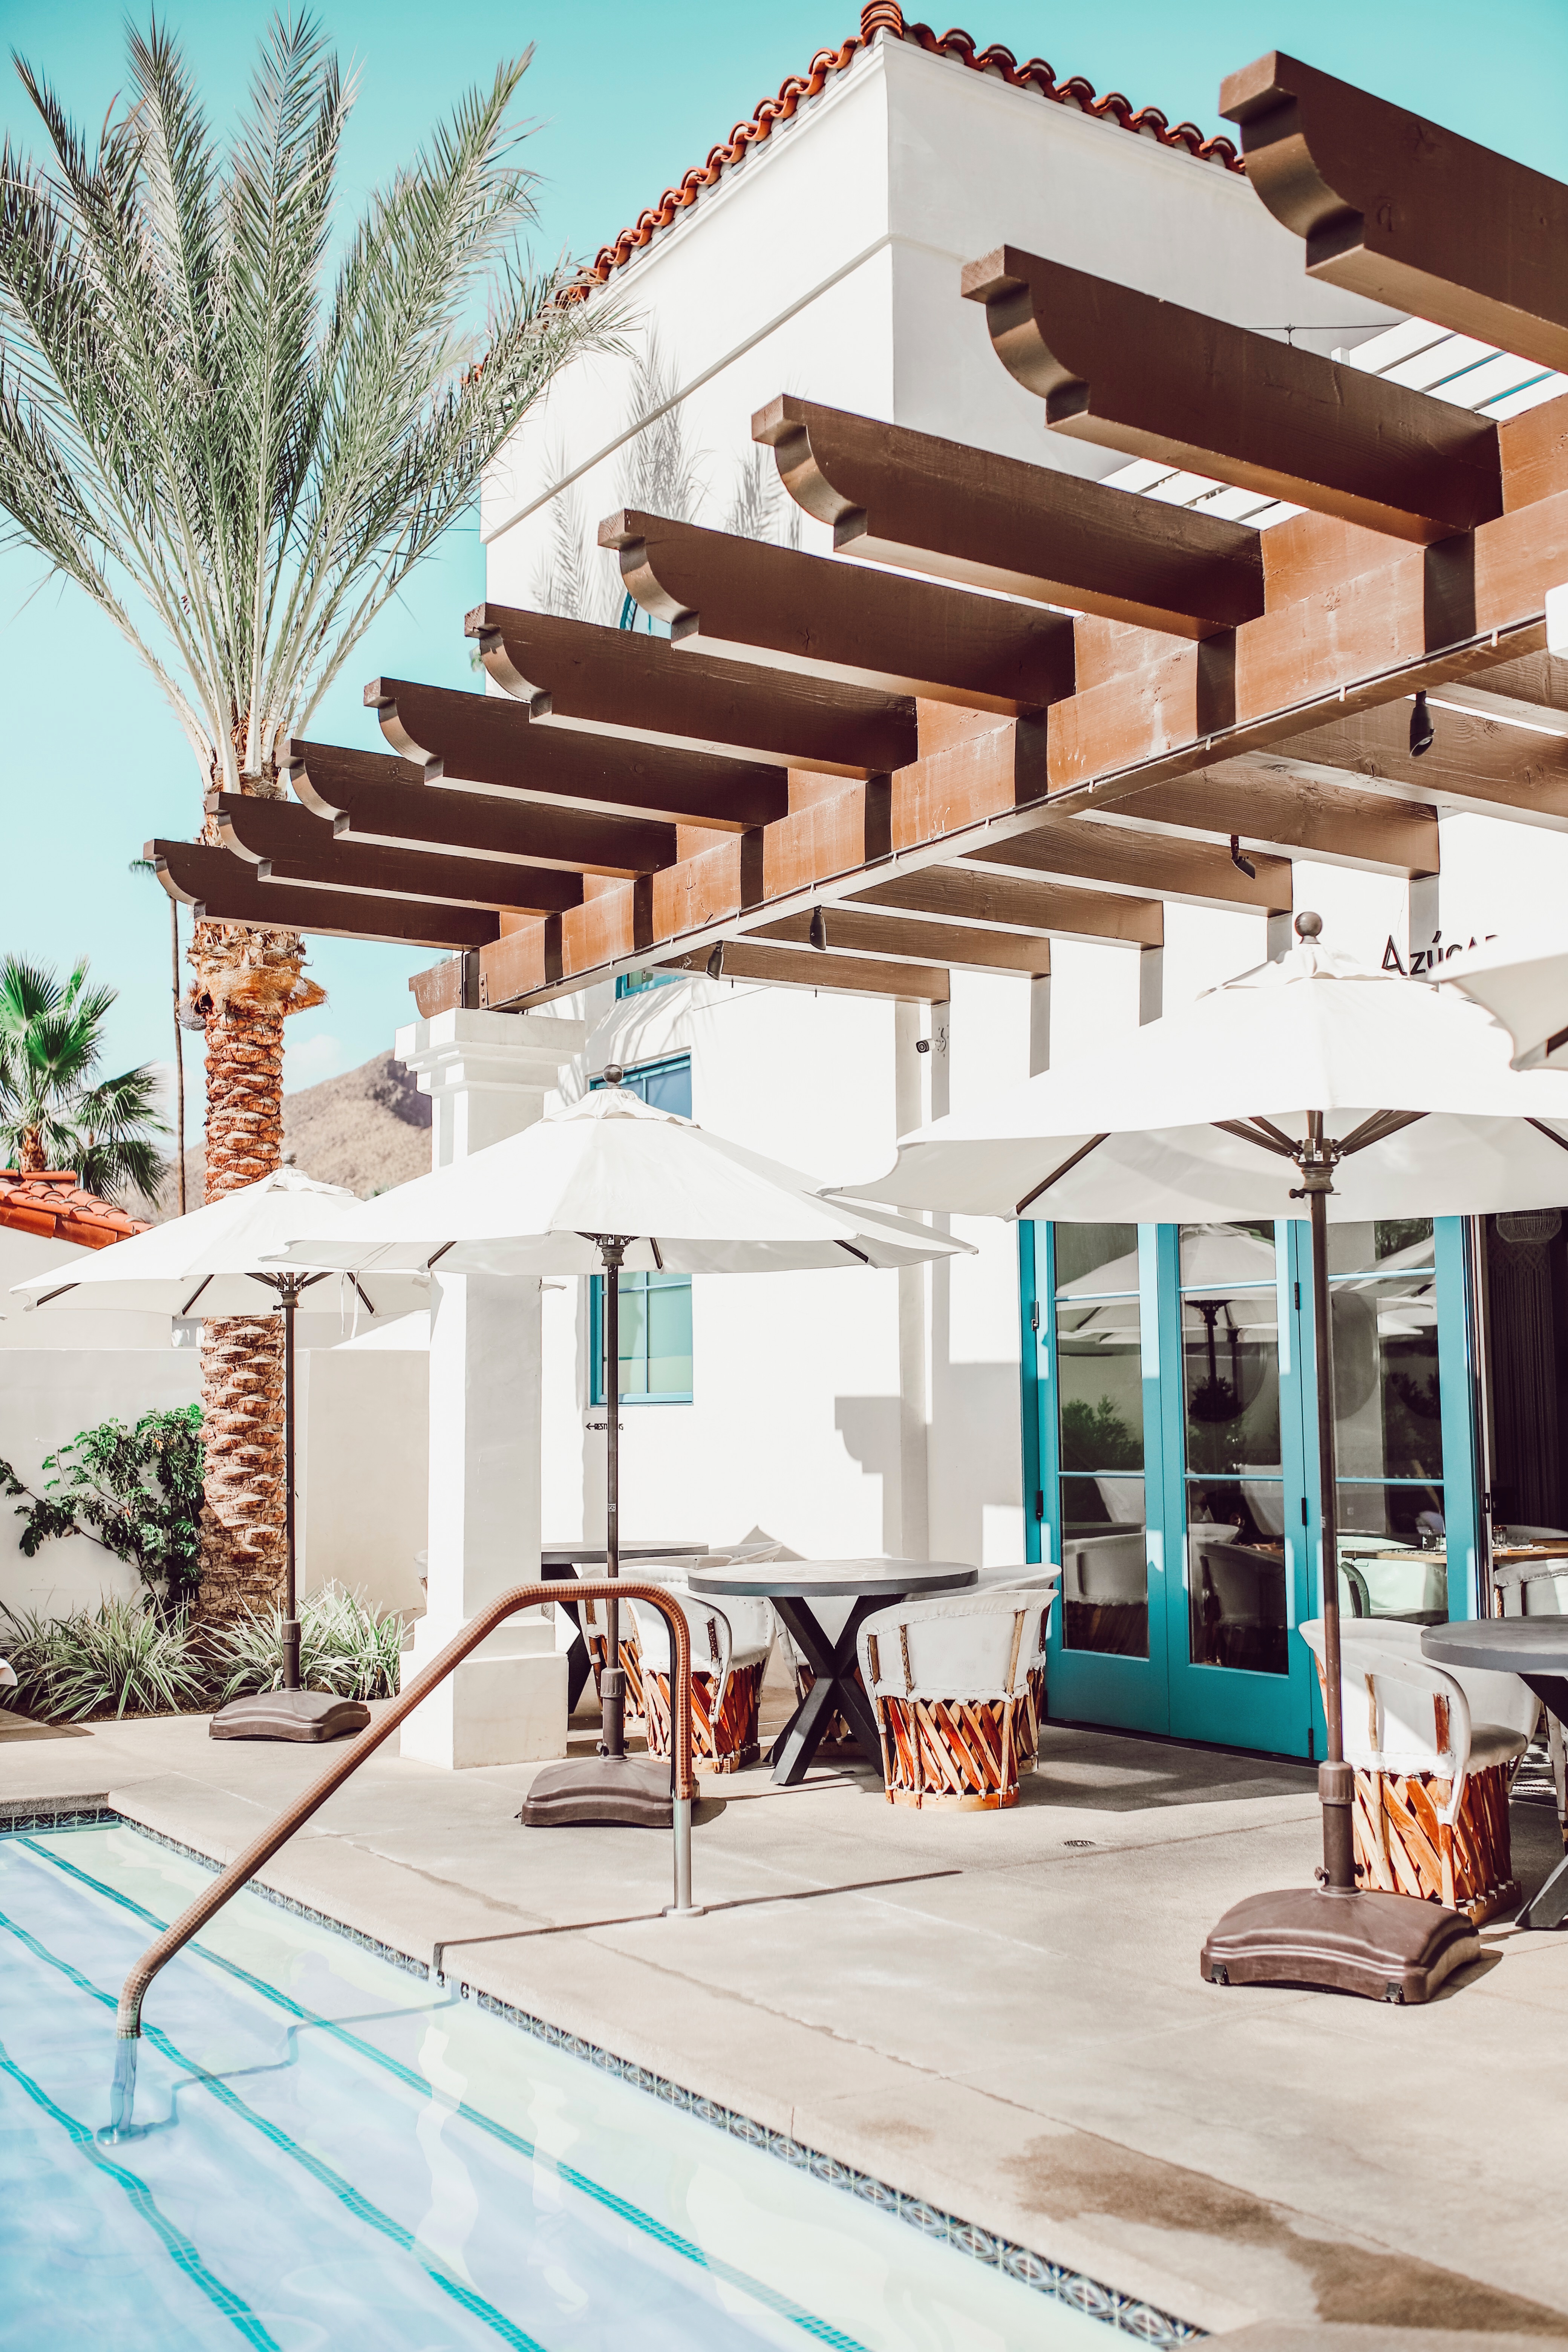 Things to do in LA and Palm Springs